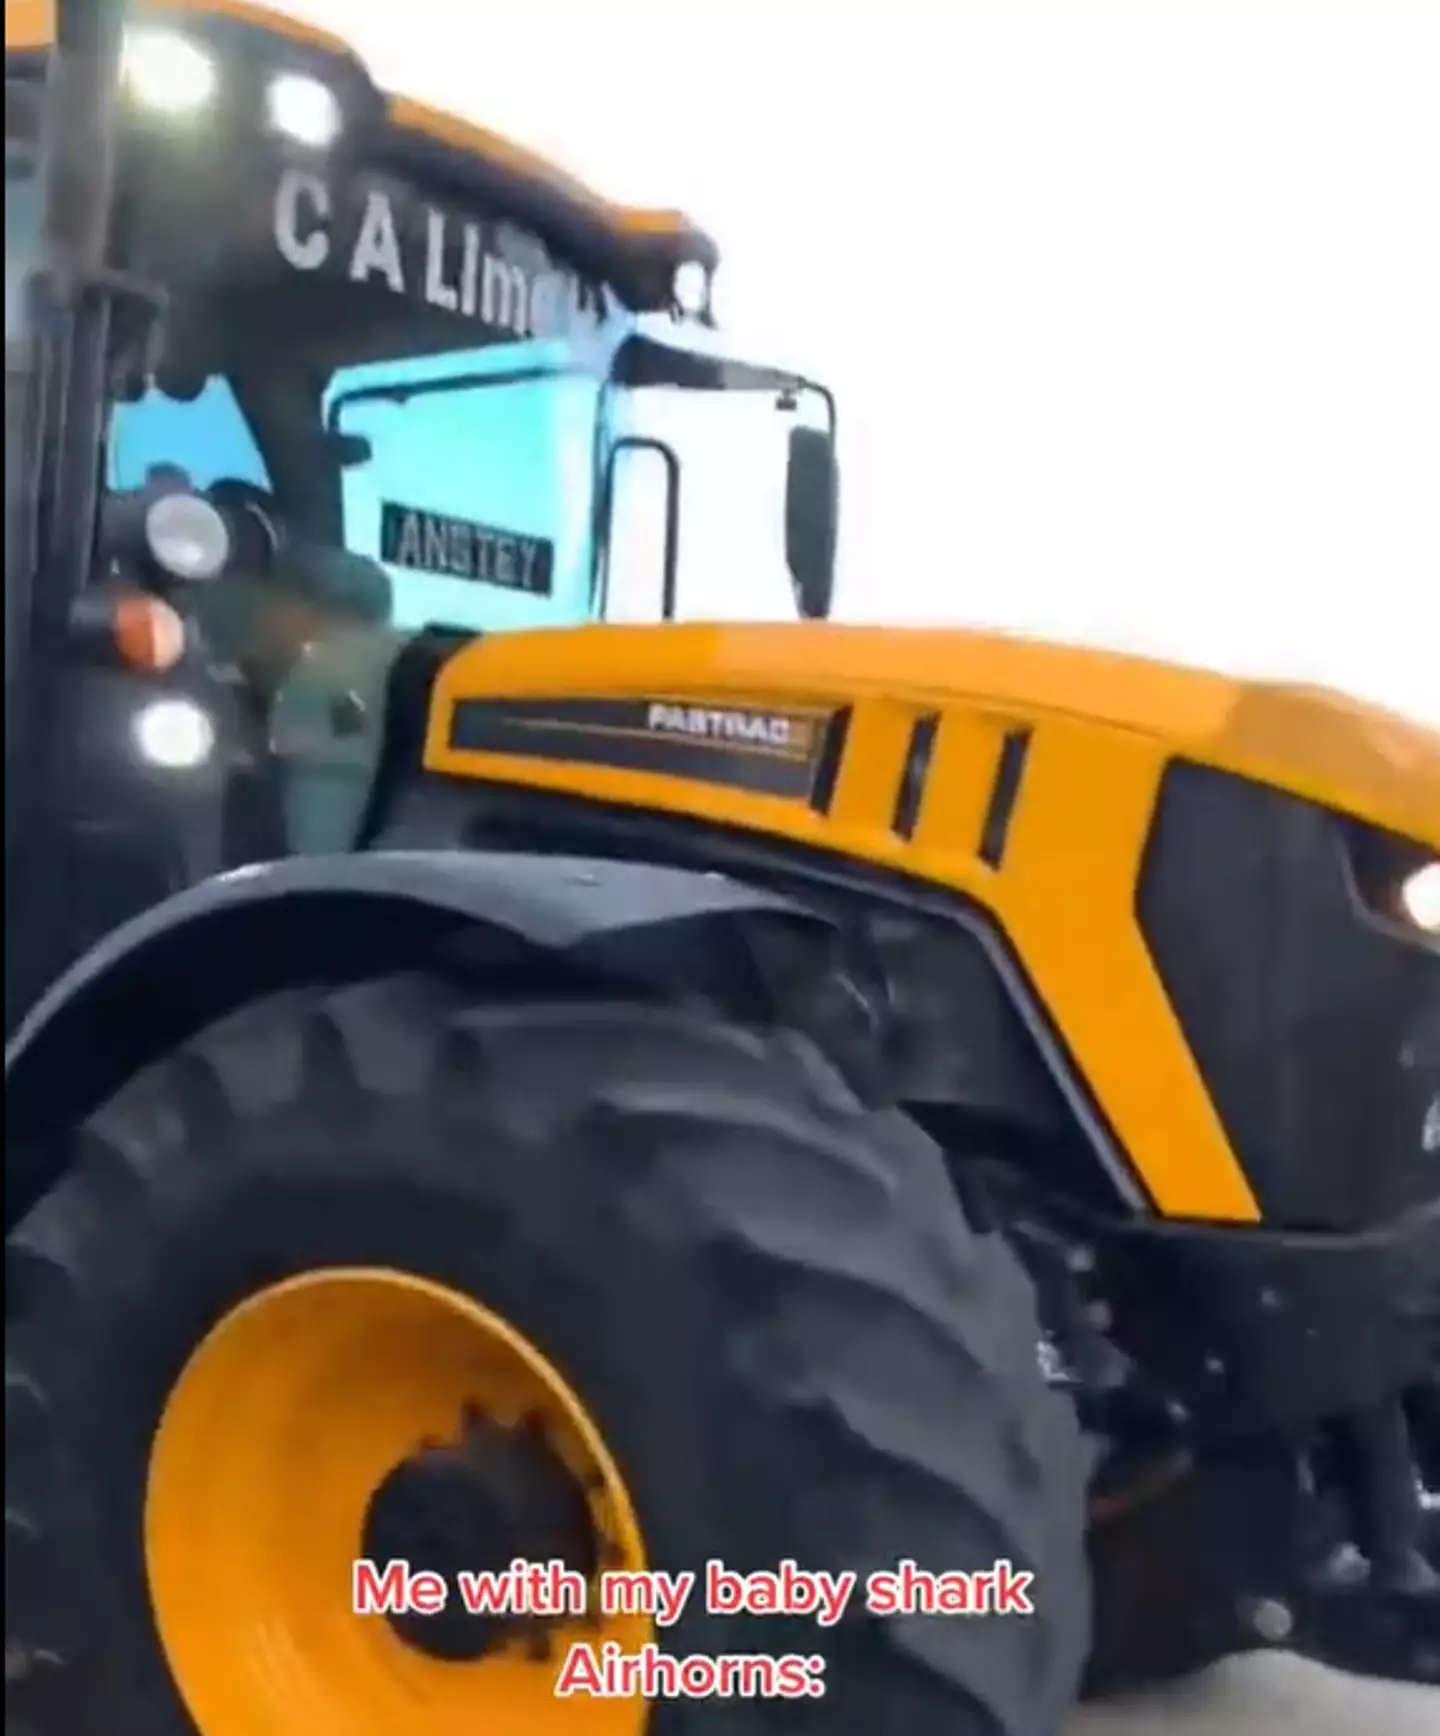 Nobody is topping the tractor that plays Baby Shark as far as prom entrances go.